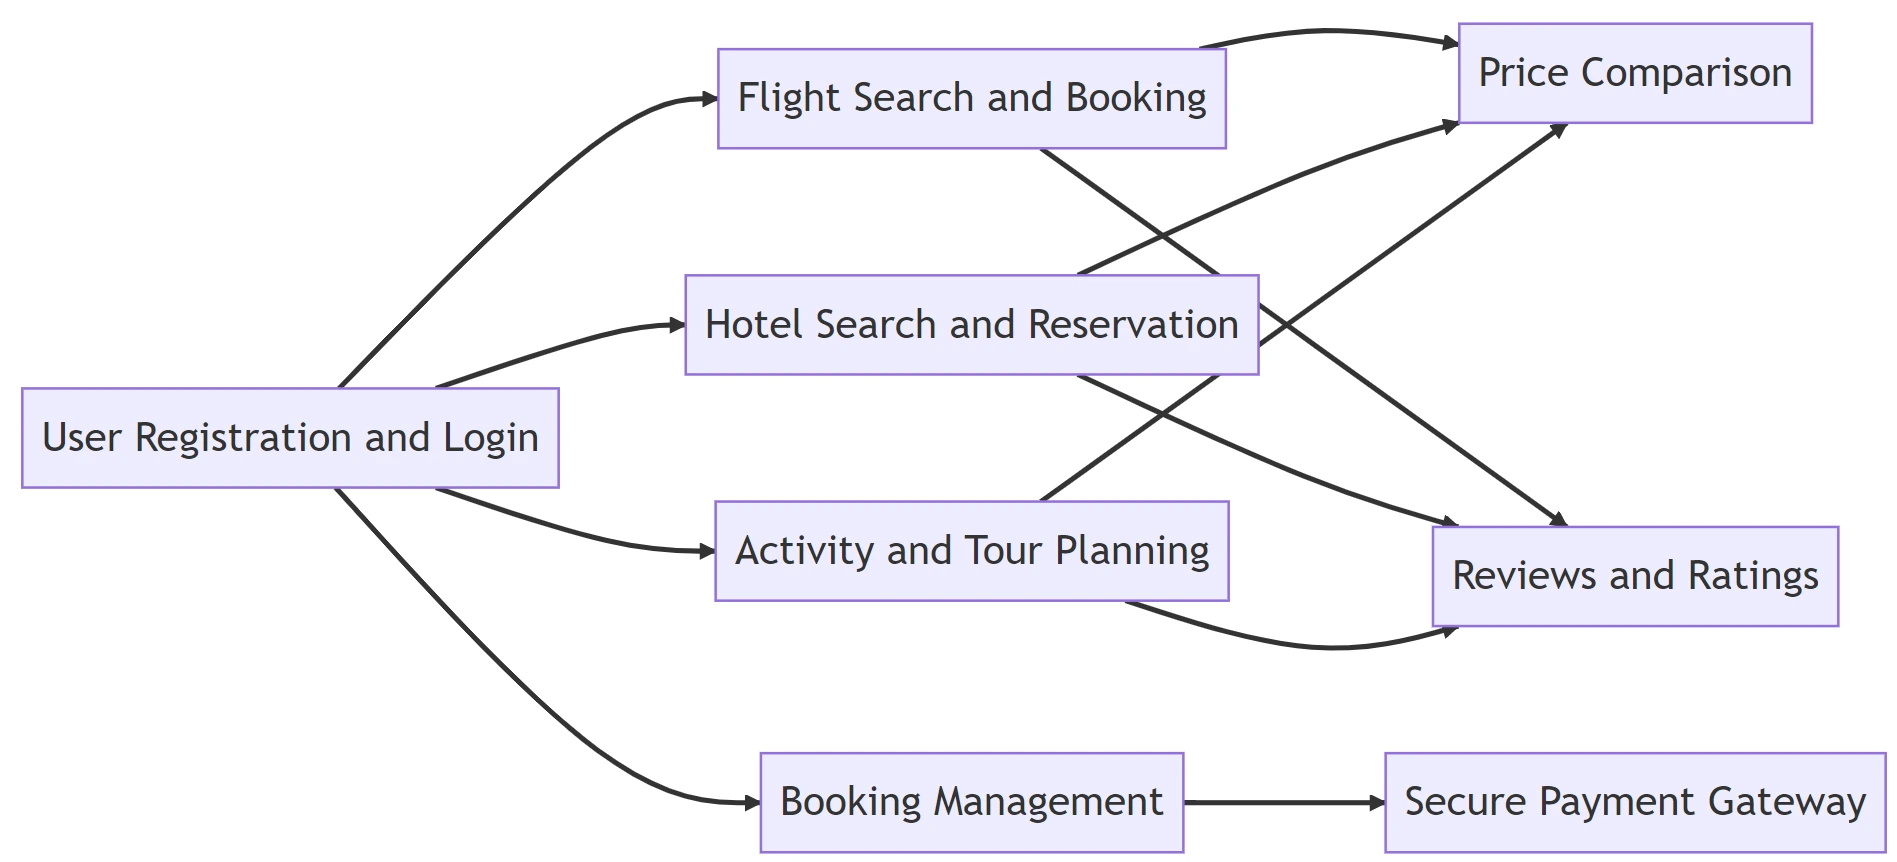 Travel booking aggregator for flights, hotels, and activities - best project topics